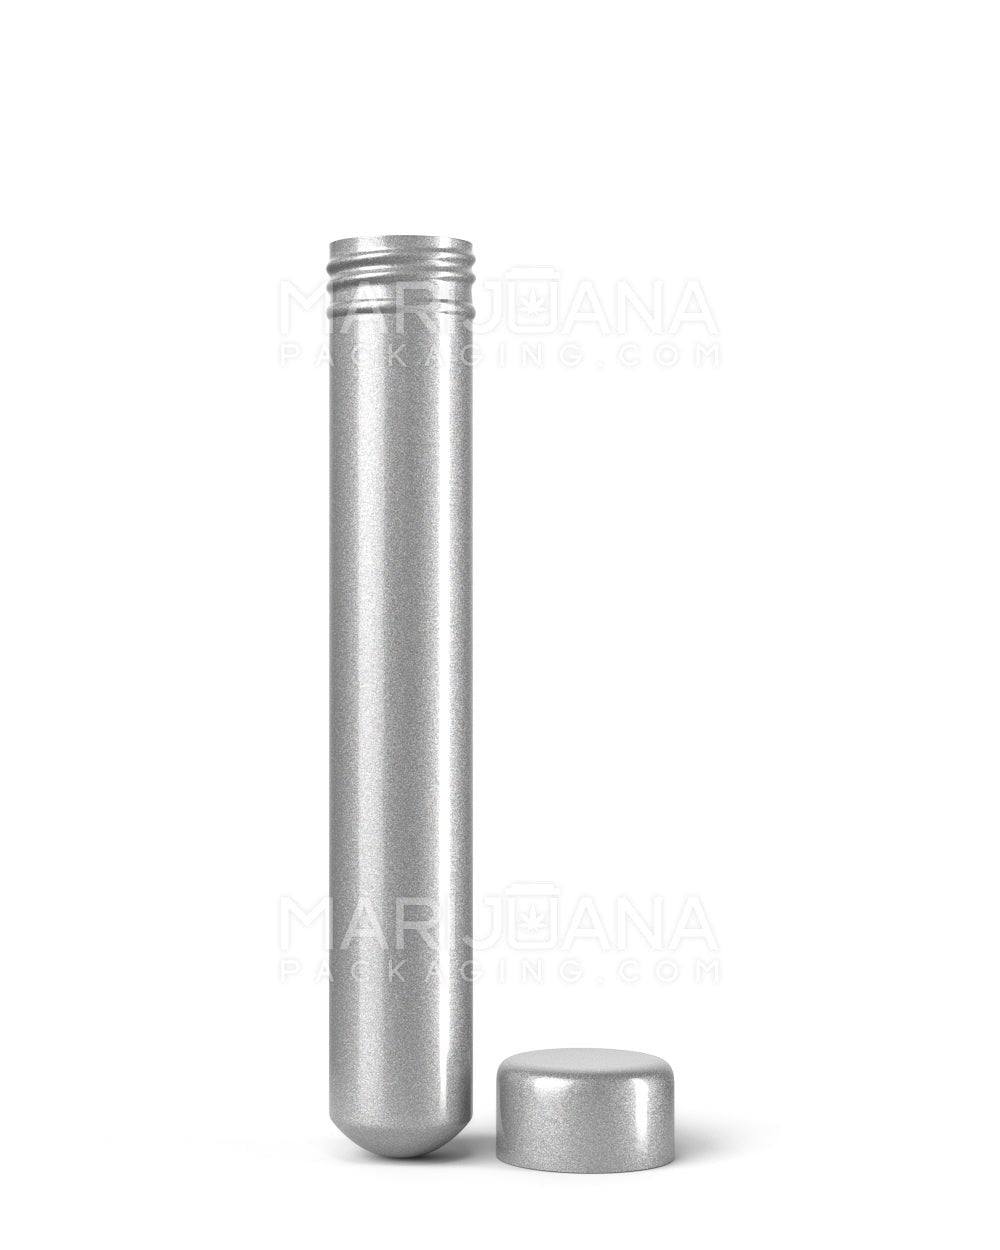 Child Resistant | King Size Pop Top Opaque Metal Pre-Roll Tubes | 110mm - Silver - 250 Count - 3